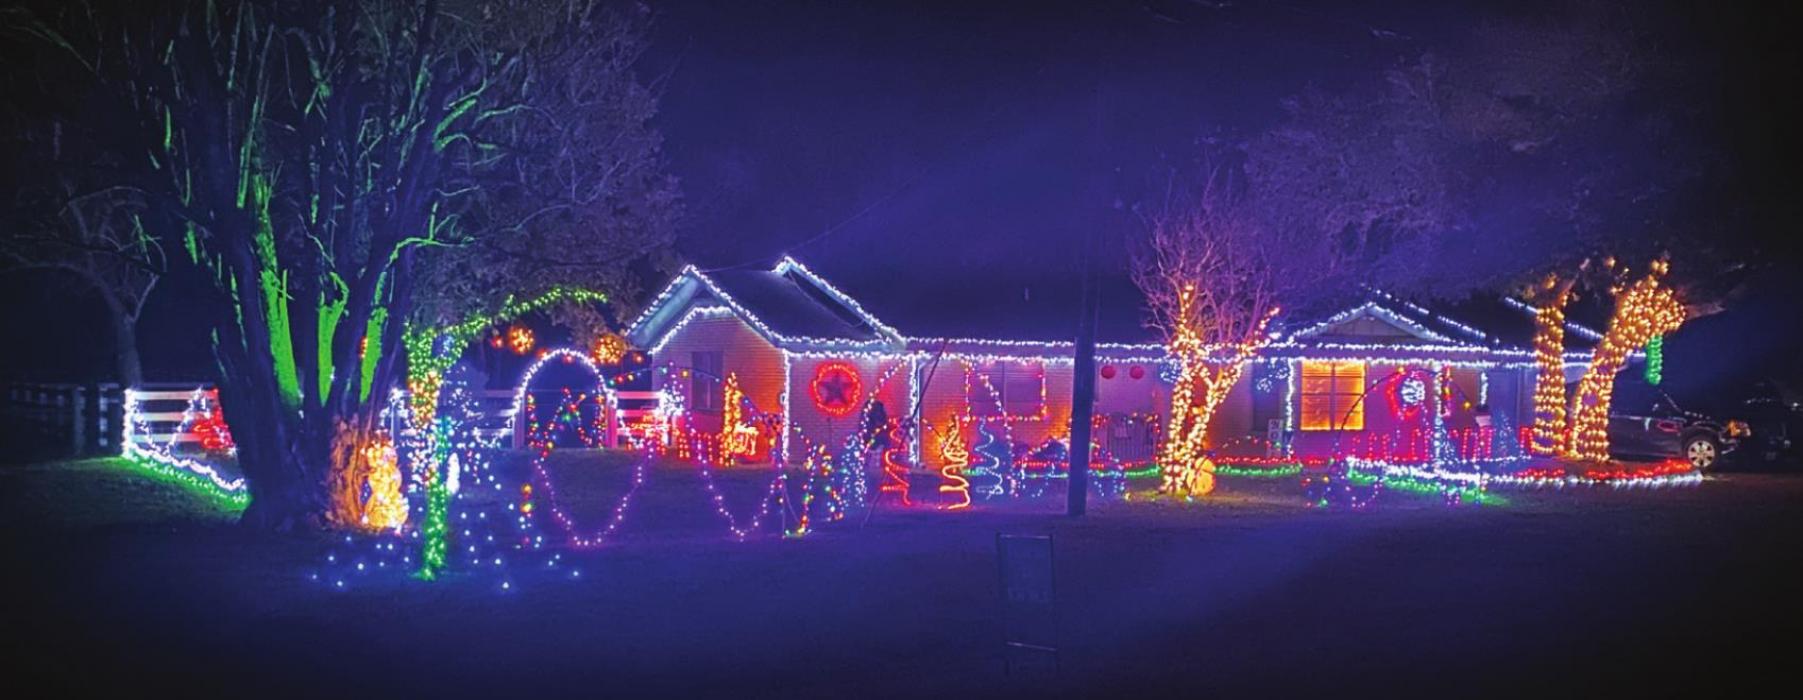 The Fayetteville Christmas Decorations winning home, the Cartwrights, at 780 N. FM 1291.